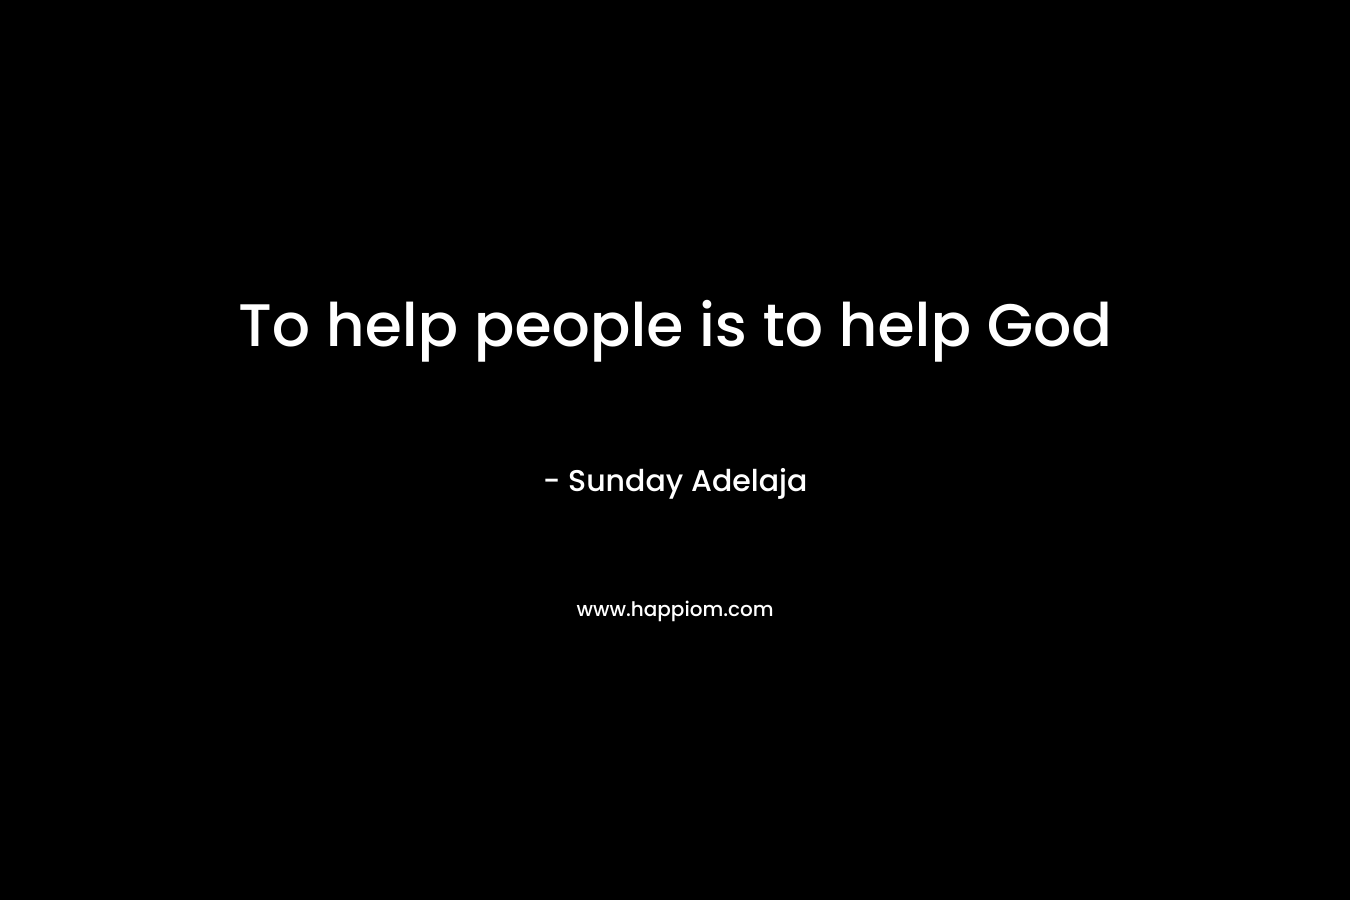 To help people is to help God